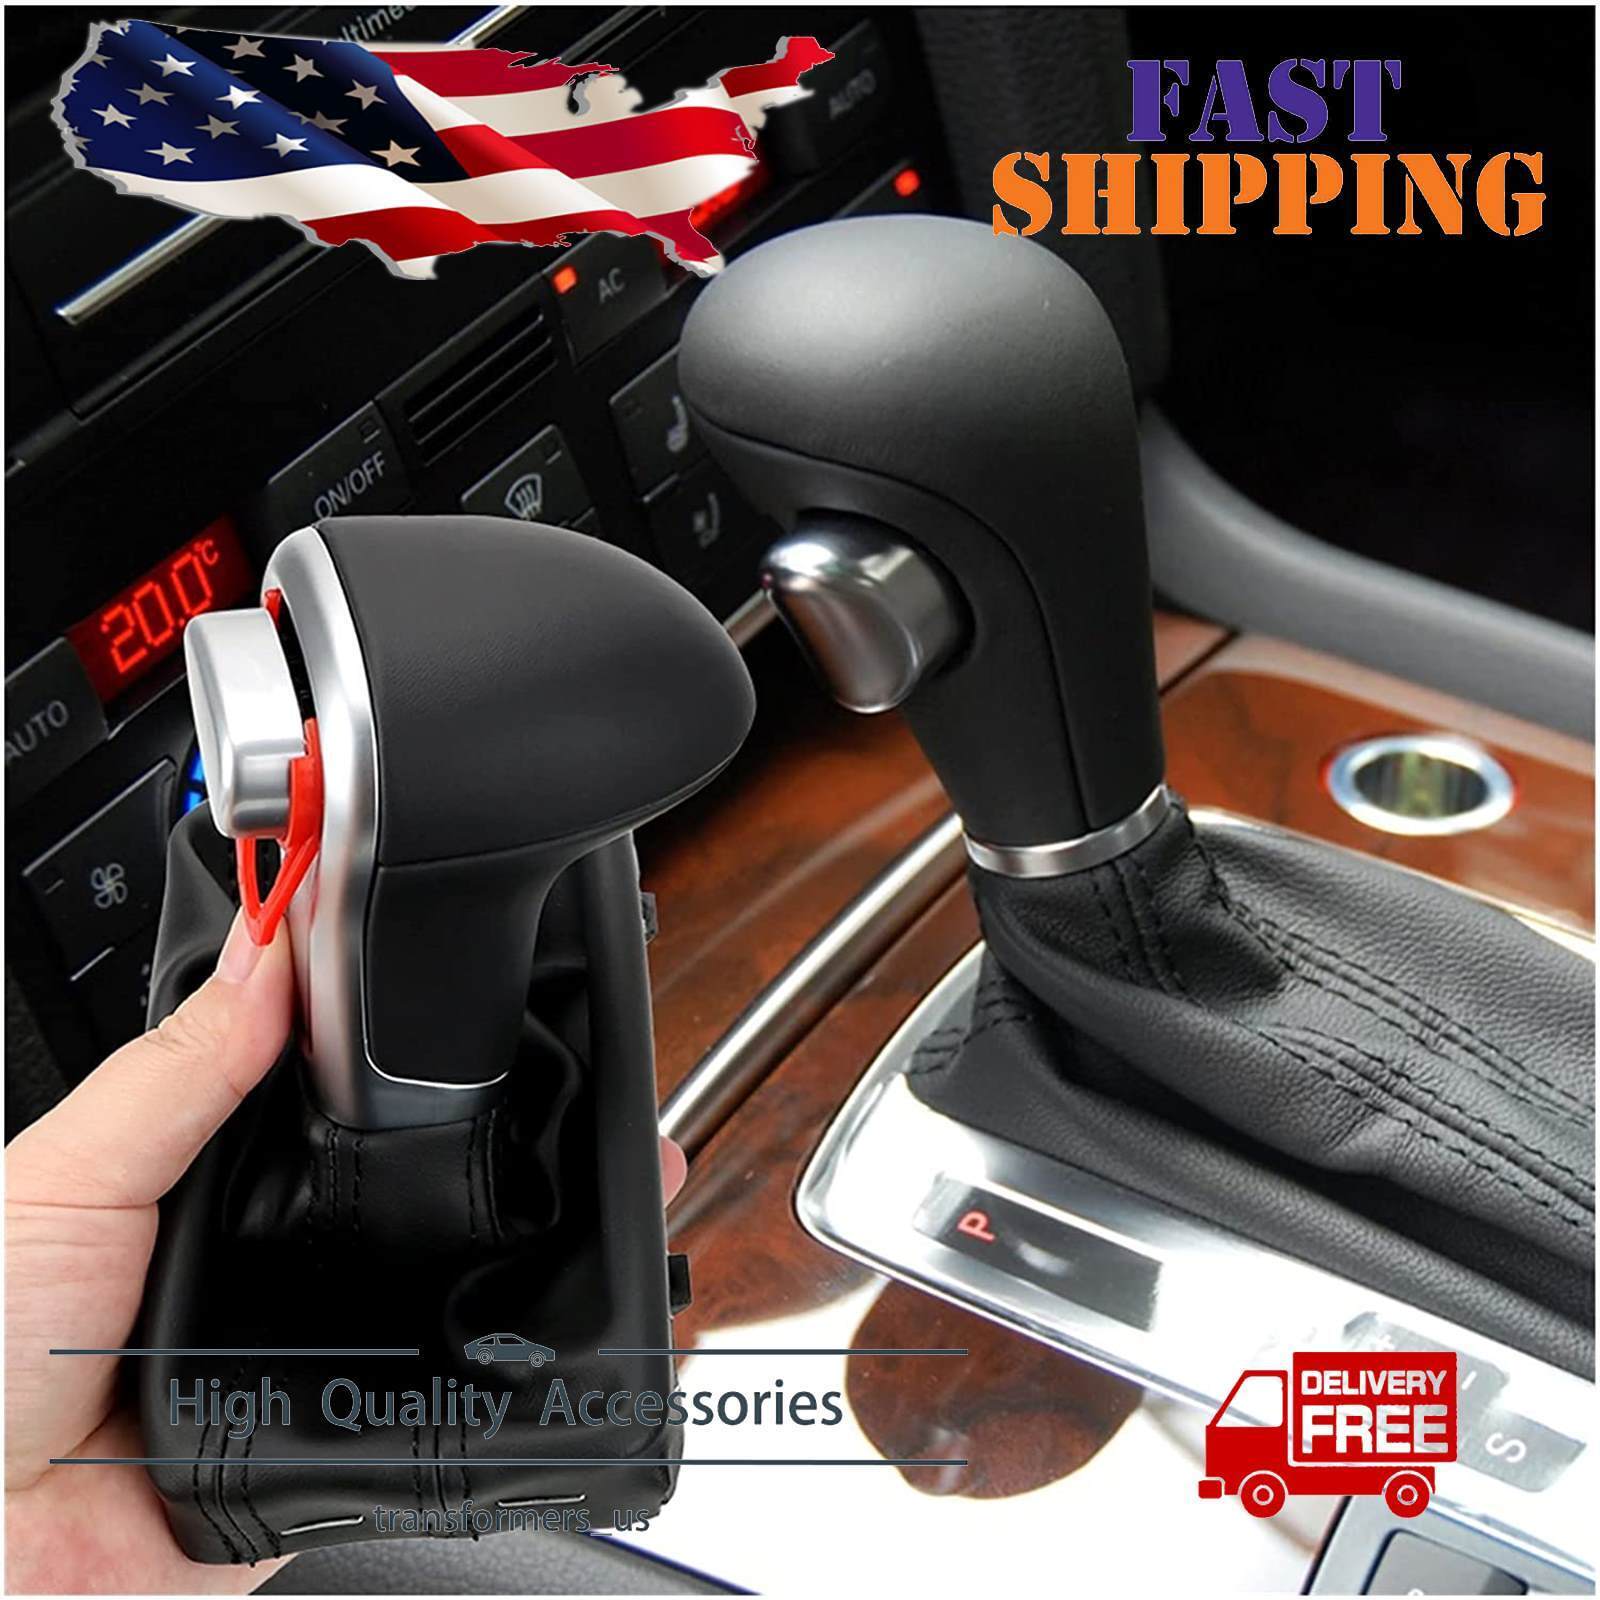 Automatic Gear Shift Knob Gearbox Handle For Audi A6 A5 A4 A3 Q5 Q7 2008+